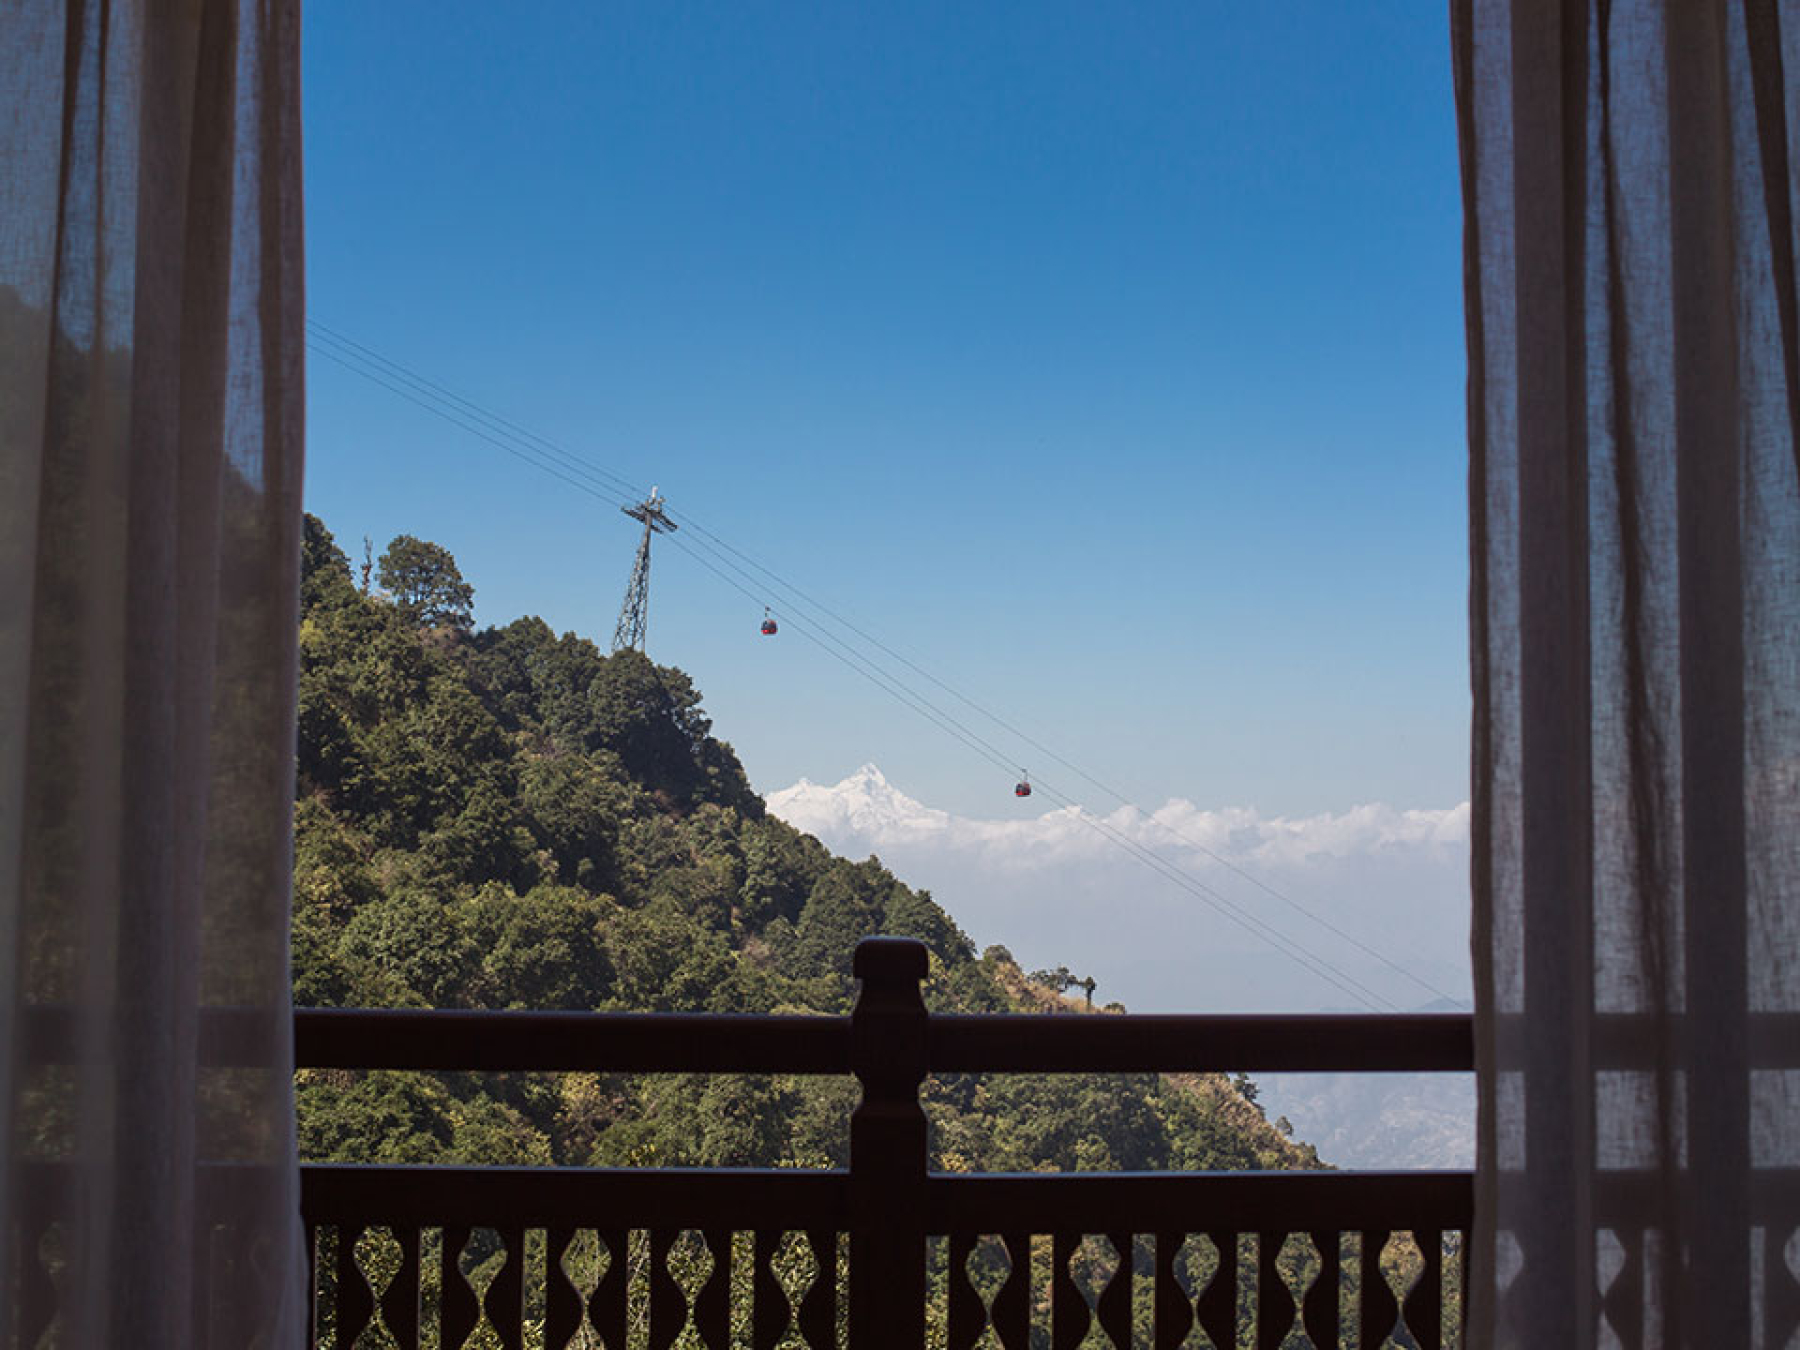 View of Cable car from the resort room